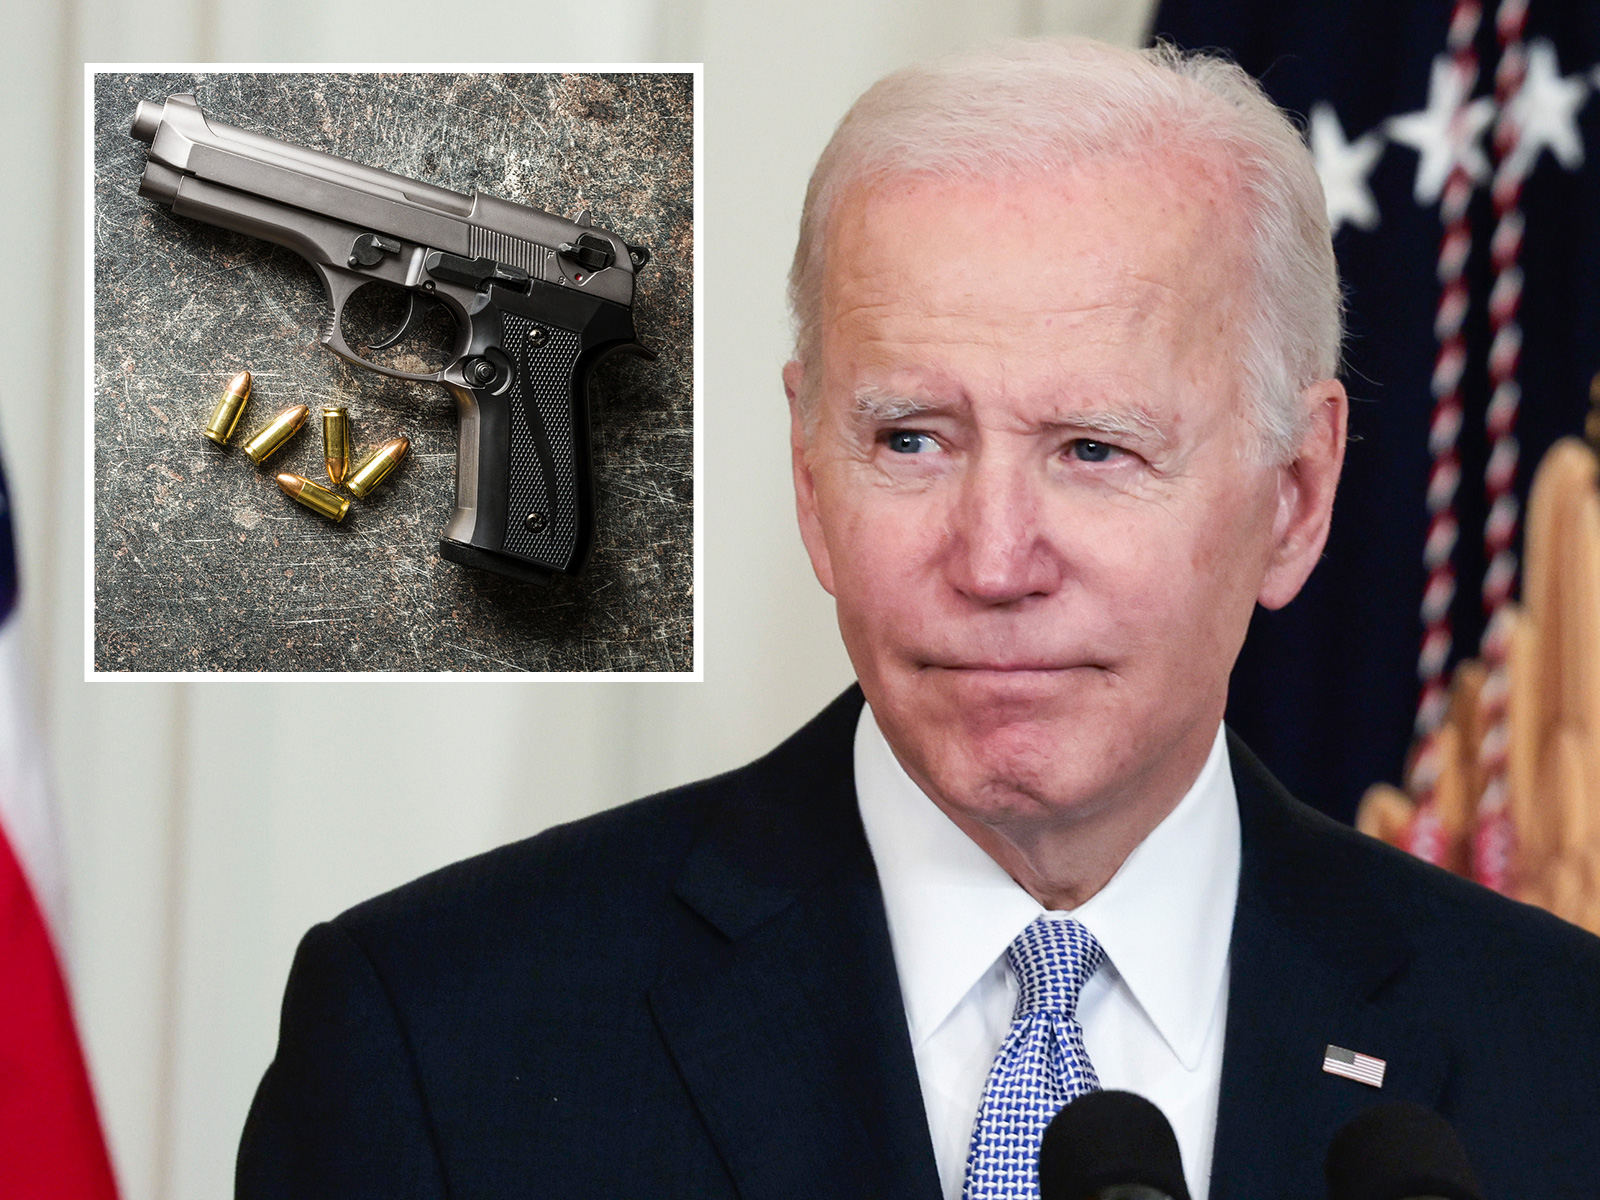 Joe Biden Says 9mm Bullet Blows The Lung Out of The Body